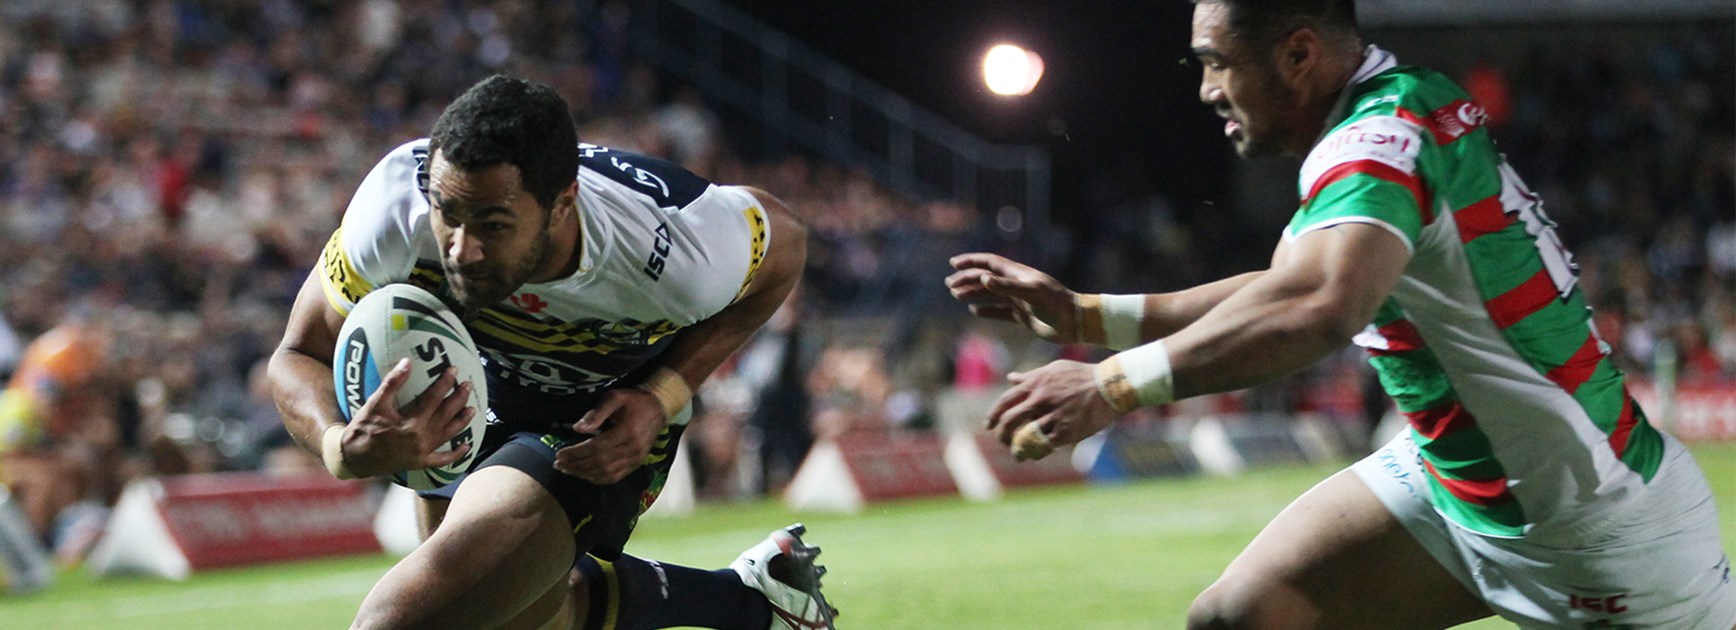 Justin O'Neil scores the opening try for the Cowboys on Thursday night.